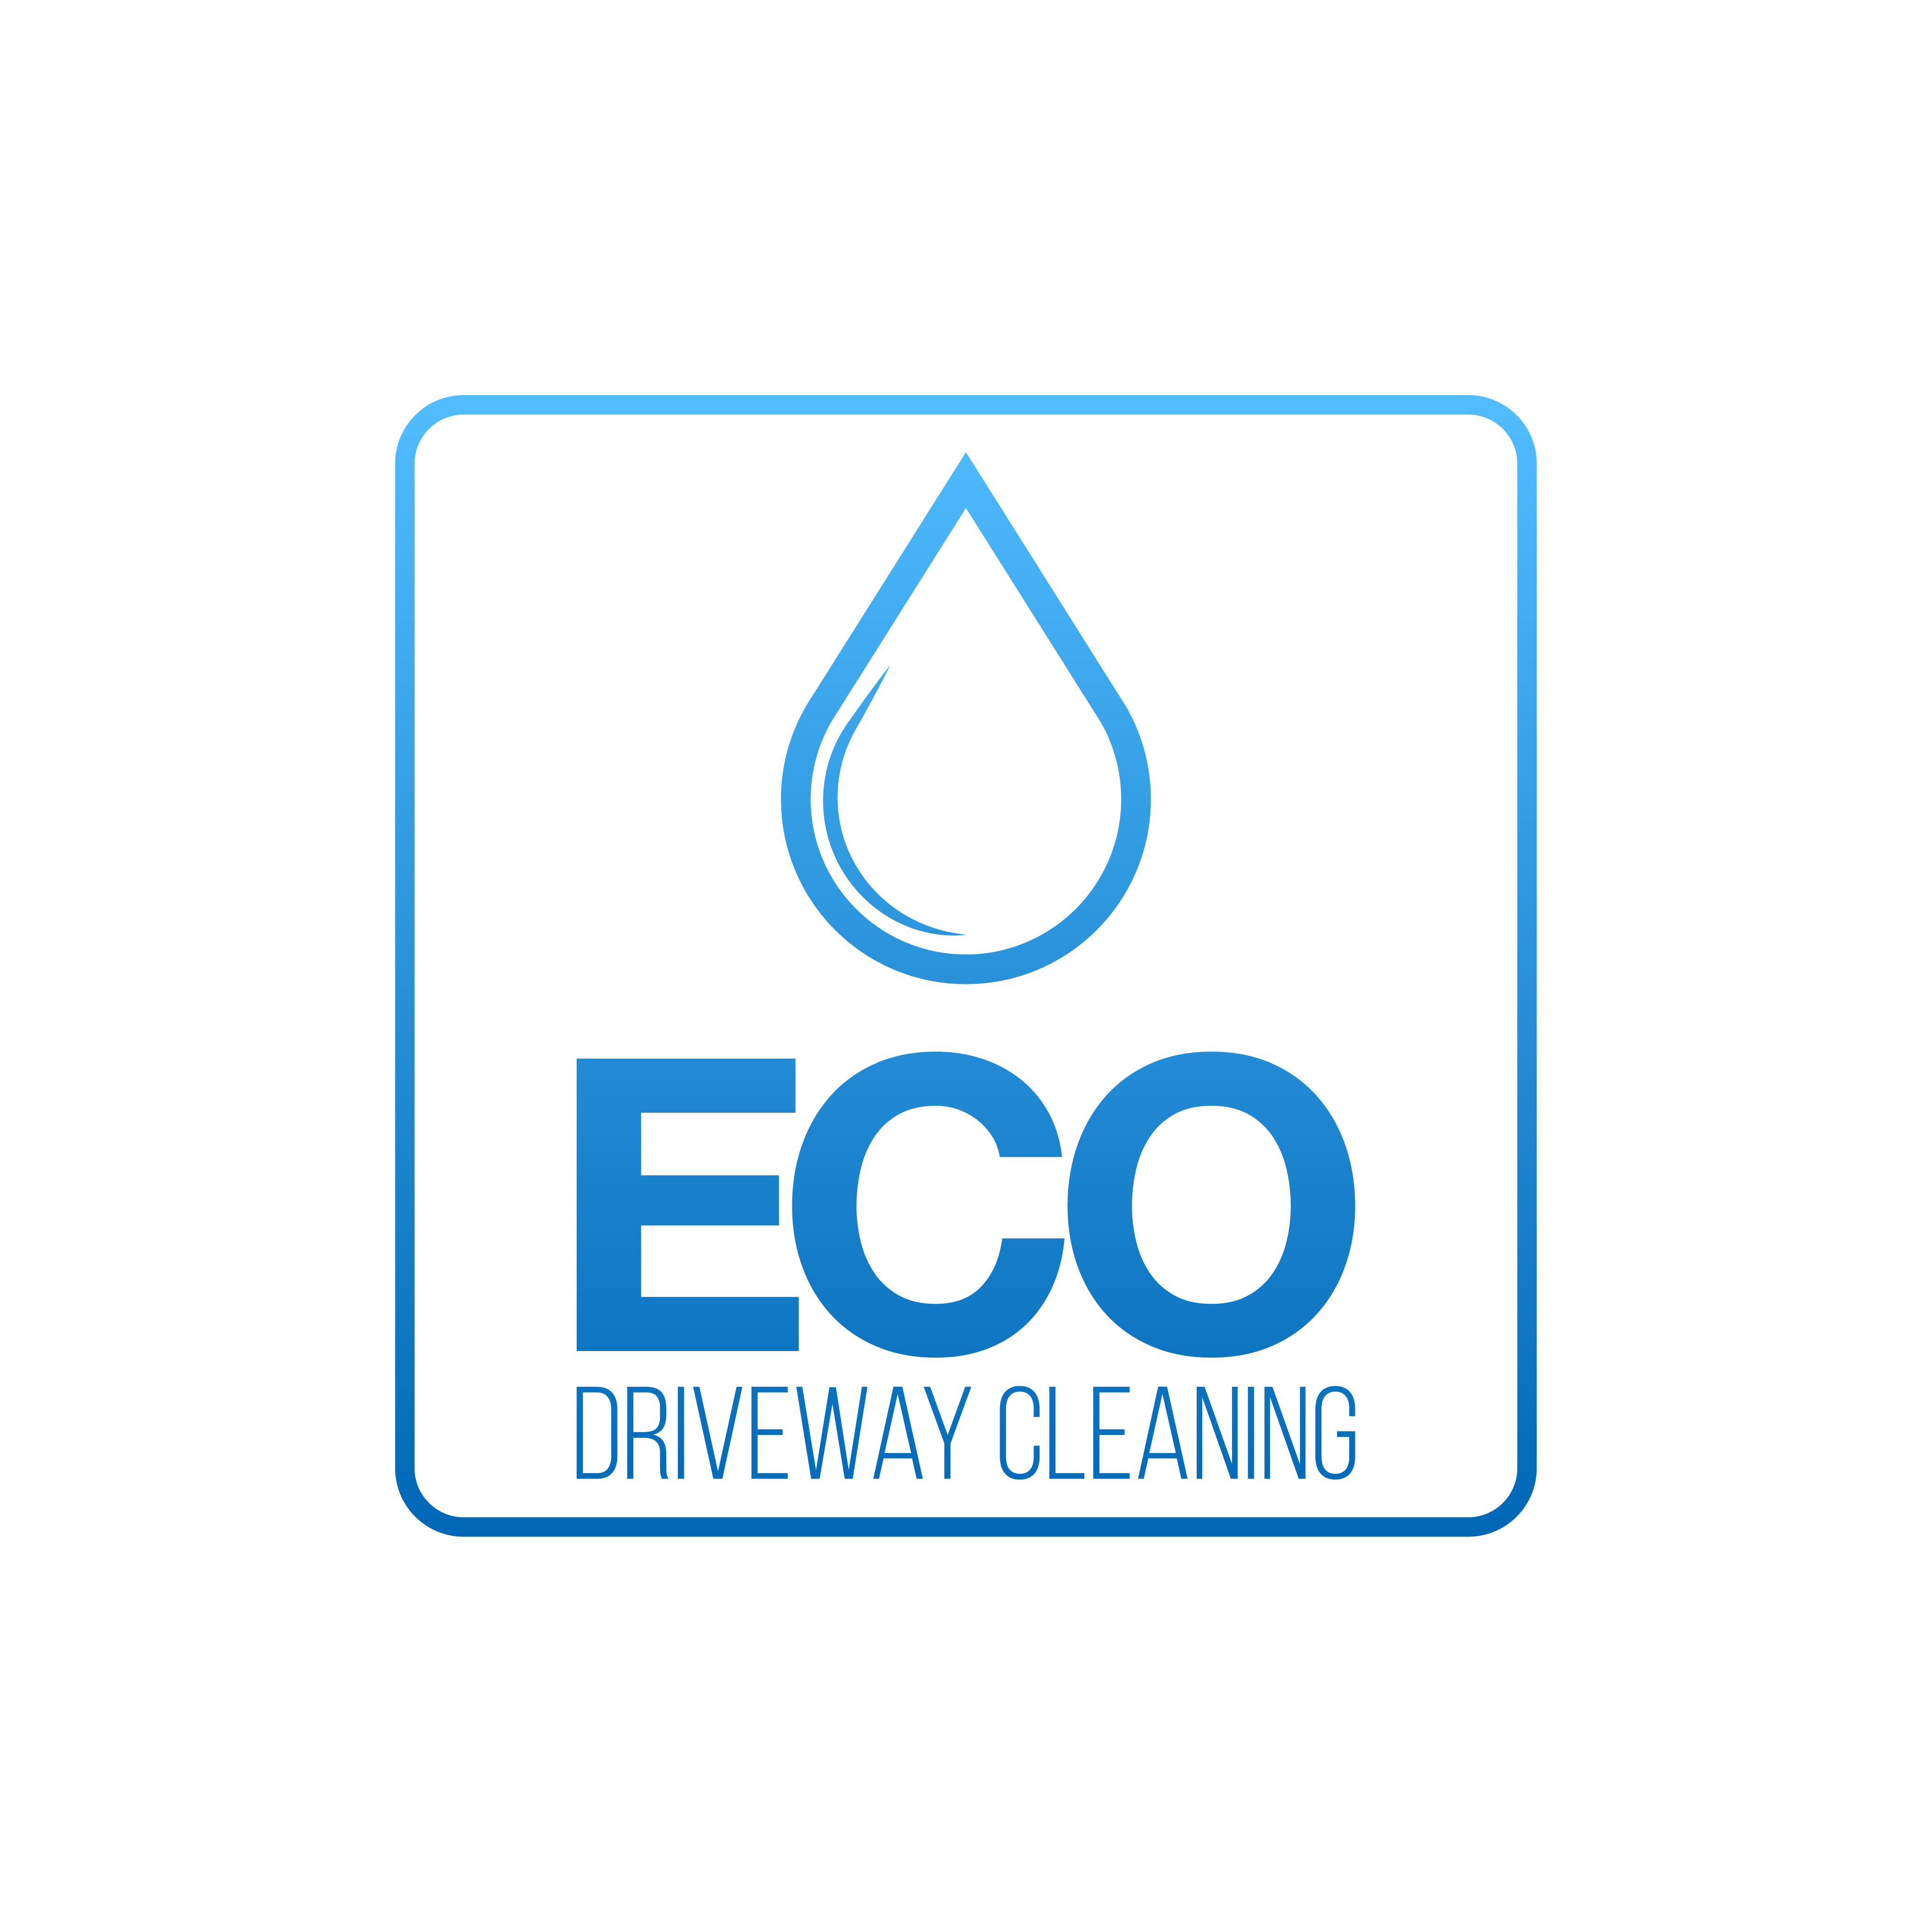 Logo of Eco Driveway Cleaning